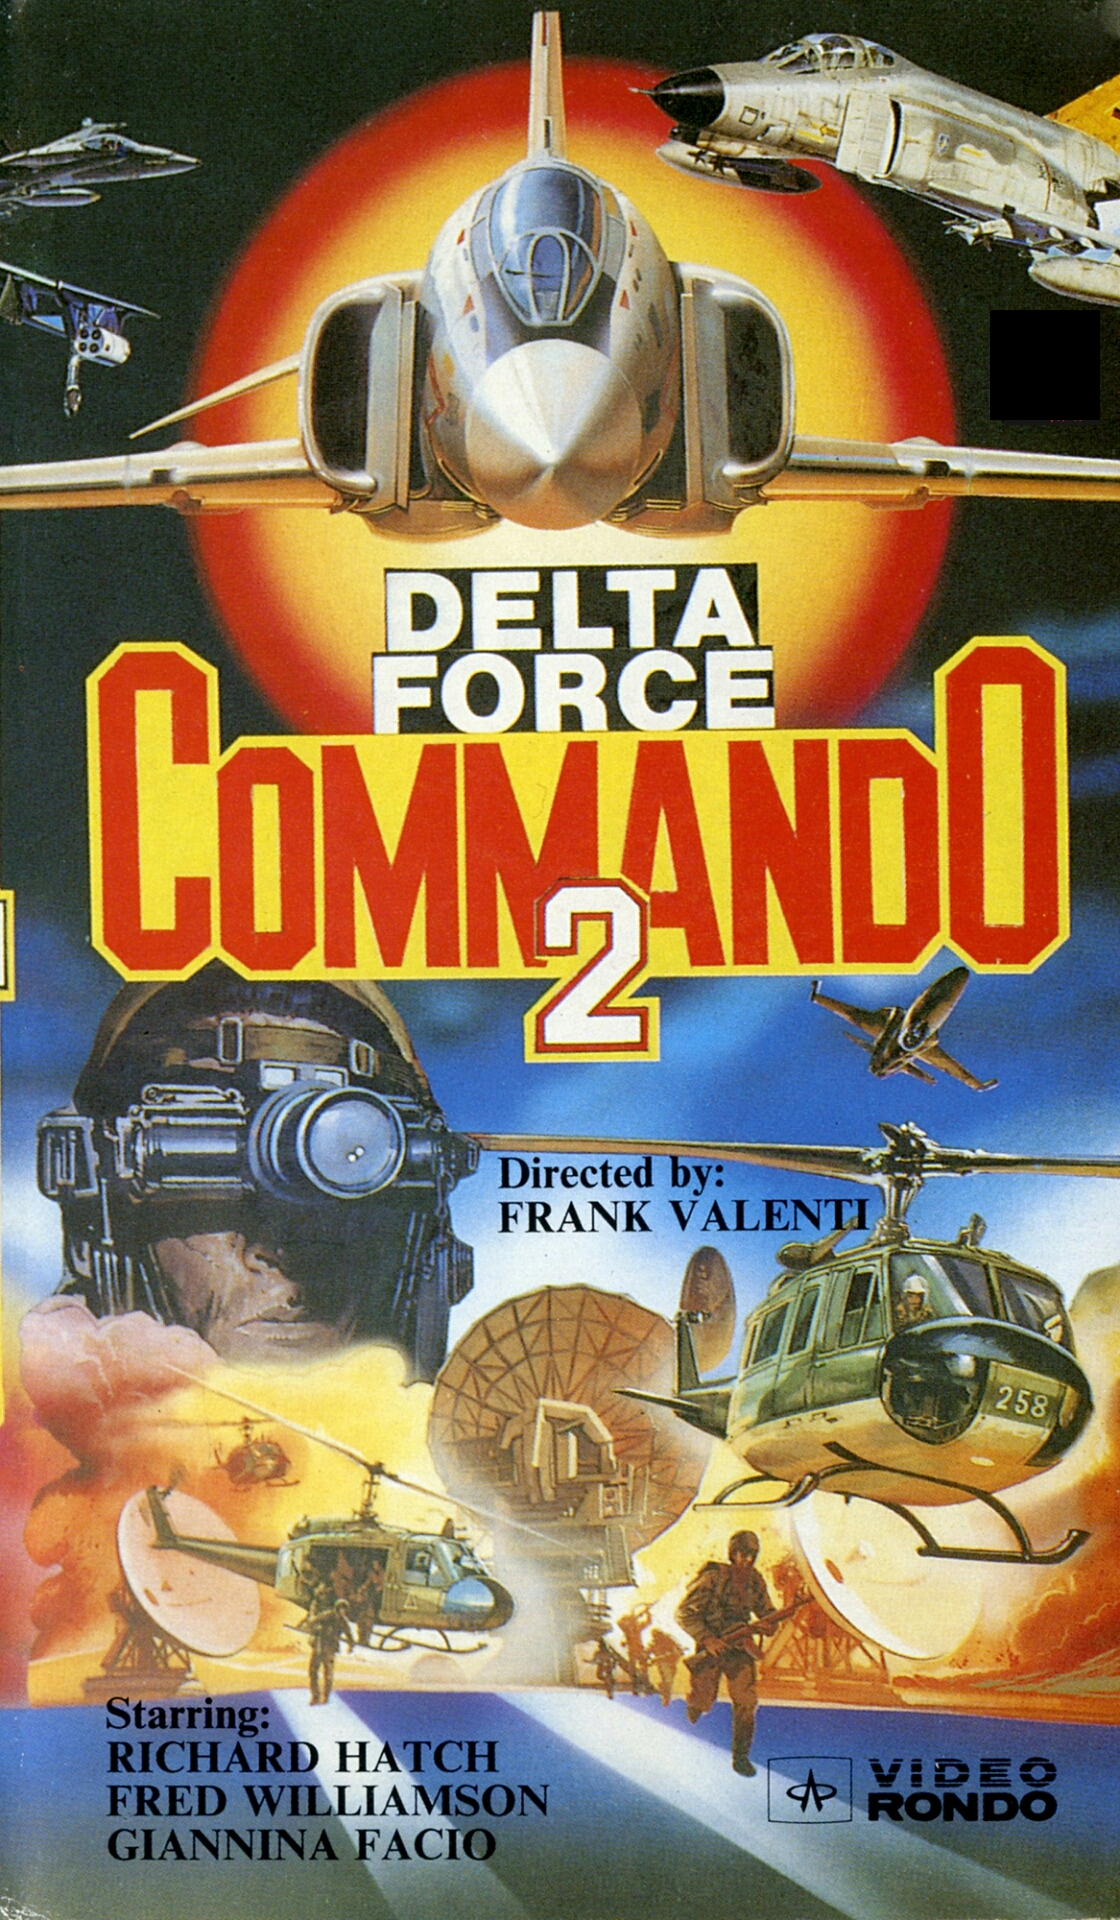 Delta Force Commando II: Priority Red One (1990) starring Richard Hatch on DVD on DVD